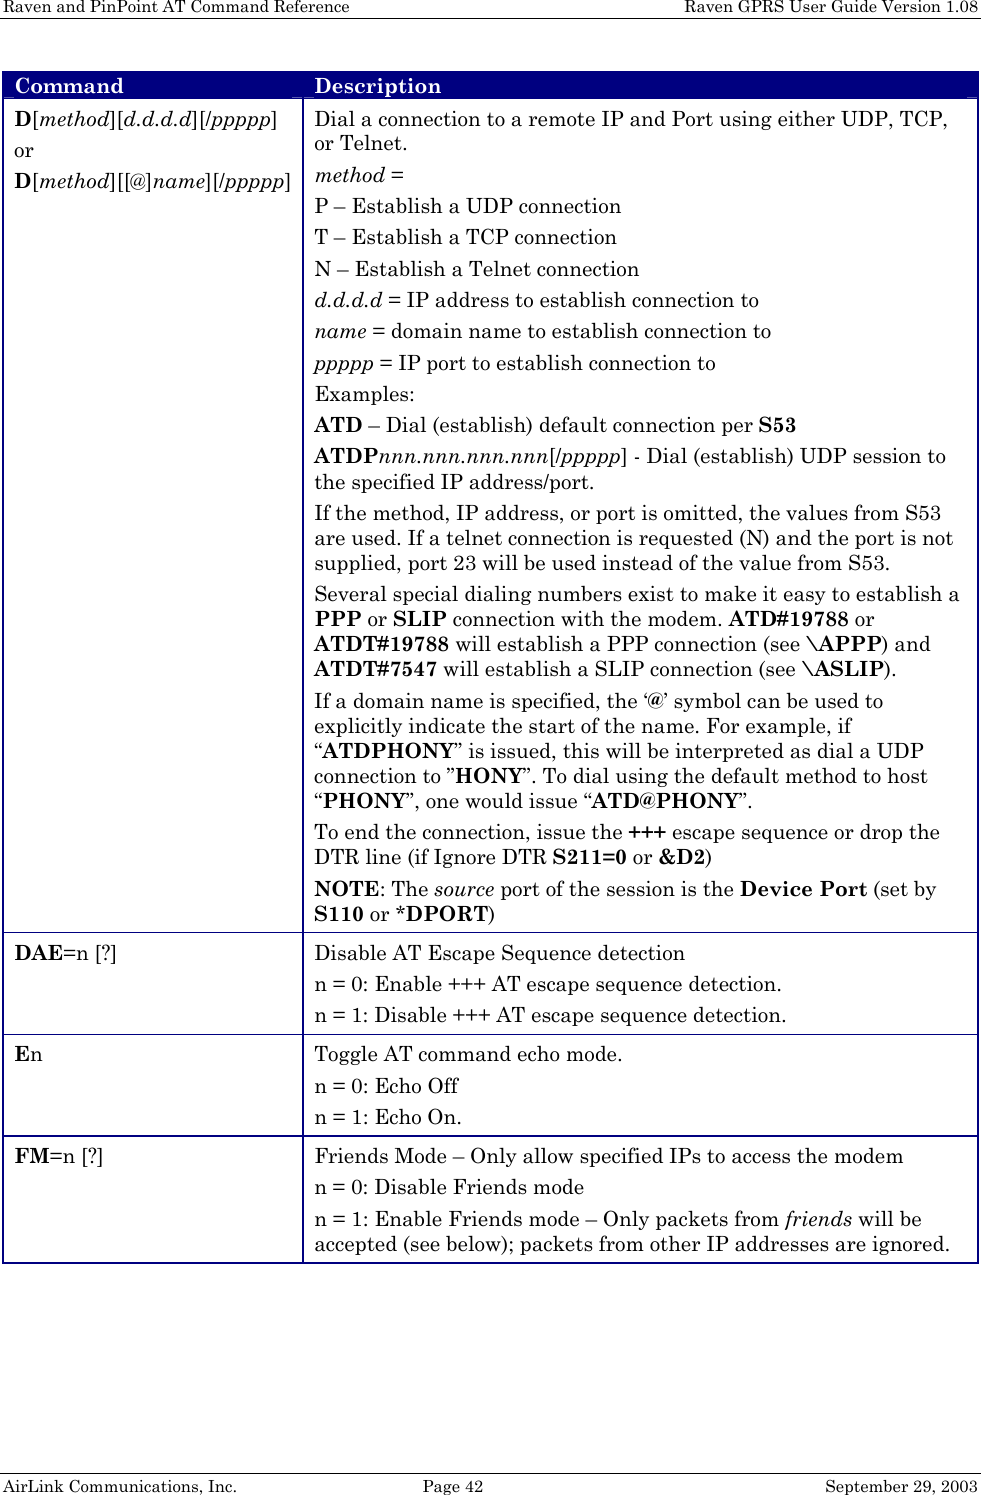 Raven and PinPoint AT Command Reference    Raven GPRS User Guide Version 1.08 AirLink Communications, Inc.  Page 42  September 29, 2003 Command Description D[method][d.d.d.d][/ppppp] or D[method][[@]name][/ppppp] Dial a connection to a remote IP and Port using either UDP, TCP, or Telnet. method = P – Establish a UDP connection T – Establish a TCP connection N – Establish a Telnet connection d.d.d.d = IP address to establish connection to name = domain name to establish connection to ppppp = IP port to establish connection to Examples: ATD – Dial (establish) default connection per S53 ATDPnnn.nnn.nnn.nnn[/ppppp] - Dial (establish) UDP session to the specified IP address/port. If the method, IP address, or port is omitted, the values from S53 are used. If a telnet connection is requested (N) and the port is not supplied, port 23 will be used instead of the value from S53. Several special dialing numbers exist to make it easy to establish a PPP or SLIP connection with the modem. ATD#19788 or ATDT#19788 will establish a PPP connection (see \APPP) and ATDT#7547 will establish a SLIP connection (see \ASLIP). If a domain name is specified, the ‘@’ symbol can be used to explicitly indicate the start of the name. For example, if “ATDPHONY” is issued, this will be interpreted as dial a UDP connection to ”HONY”. To dial using the default method to host “PHONY”, one would issue “ATD@PHONY”. To end the connection, issue the +++ escape sequence or drop the DTR line (if Ignore DTR S211=0 or &amp;D2) NOTE: The source port of the session is the Device Port (set by S110 or *DPORT) DAE=n [?] Disable AT Escape Sequence detection n = 0: Enable +++ AT escape sequence detection. n = 1: Disable +++ AT escape sequence detection. En Toggle AT command echo mode. n = 0: Echo Off n = 1: Echo On. FM=n [?] Friends Mode – Only allow specified IPs to access the modem n = 0: Disable Friends mode n = 1: Enable Friends mode – Only packets from friends will be accepted (see below); packets from other IP addresses are ignored. 